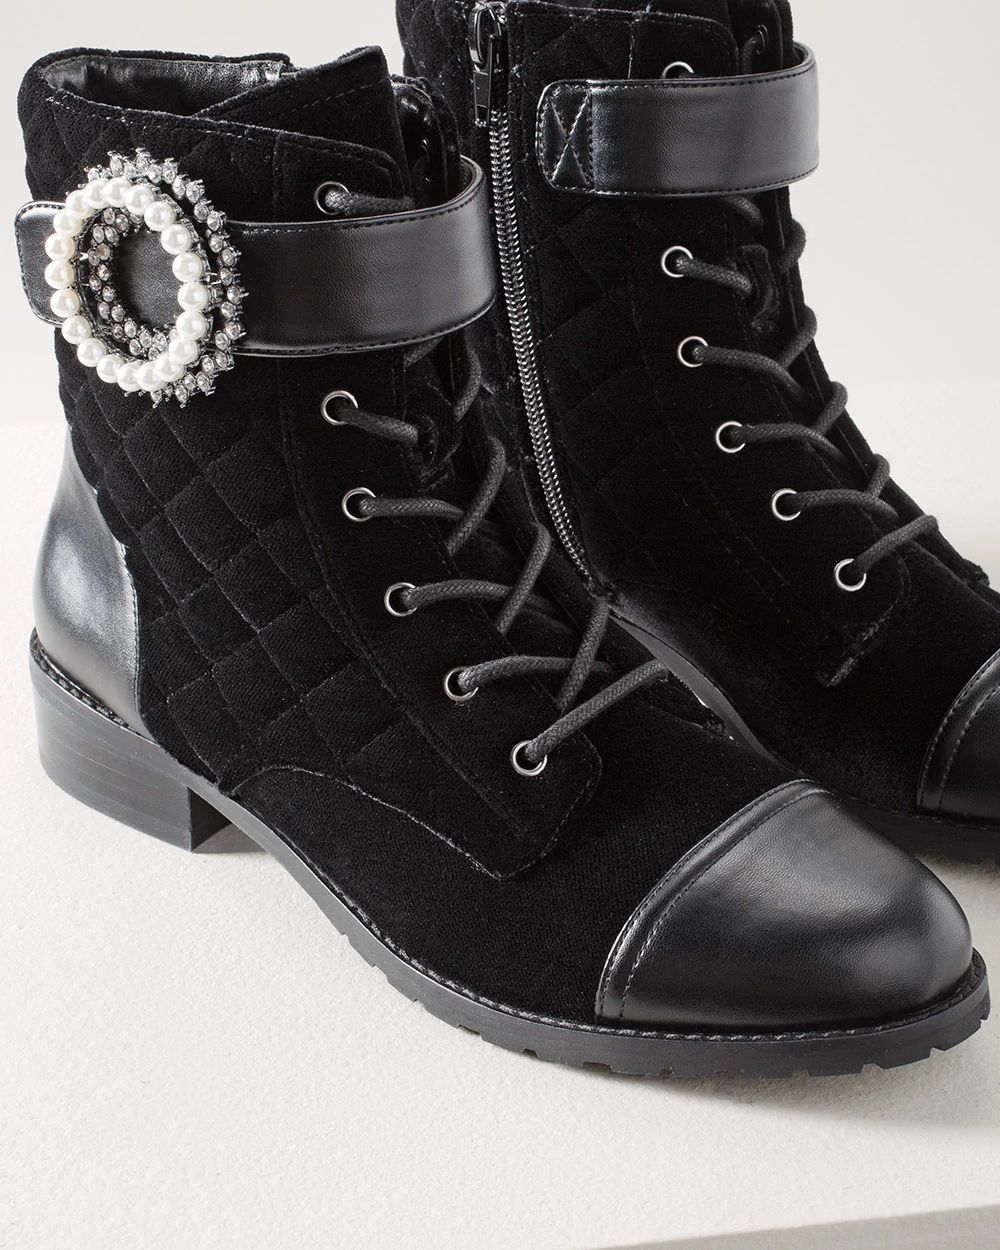 Quilted Velvet Combat Boots click to view larger image.